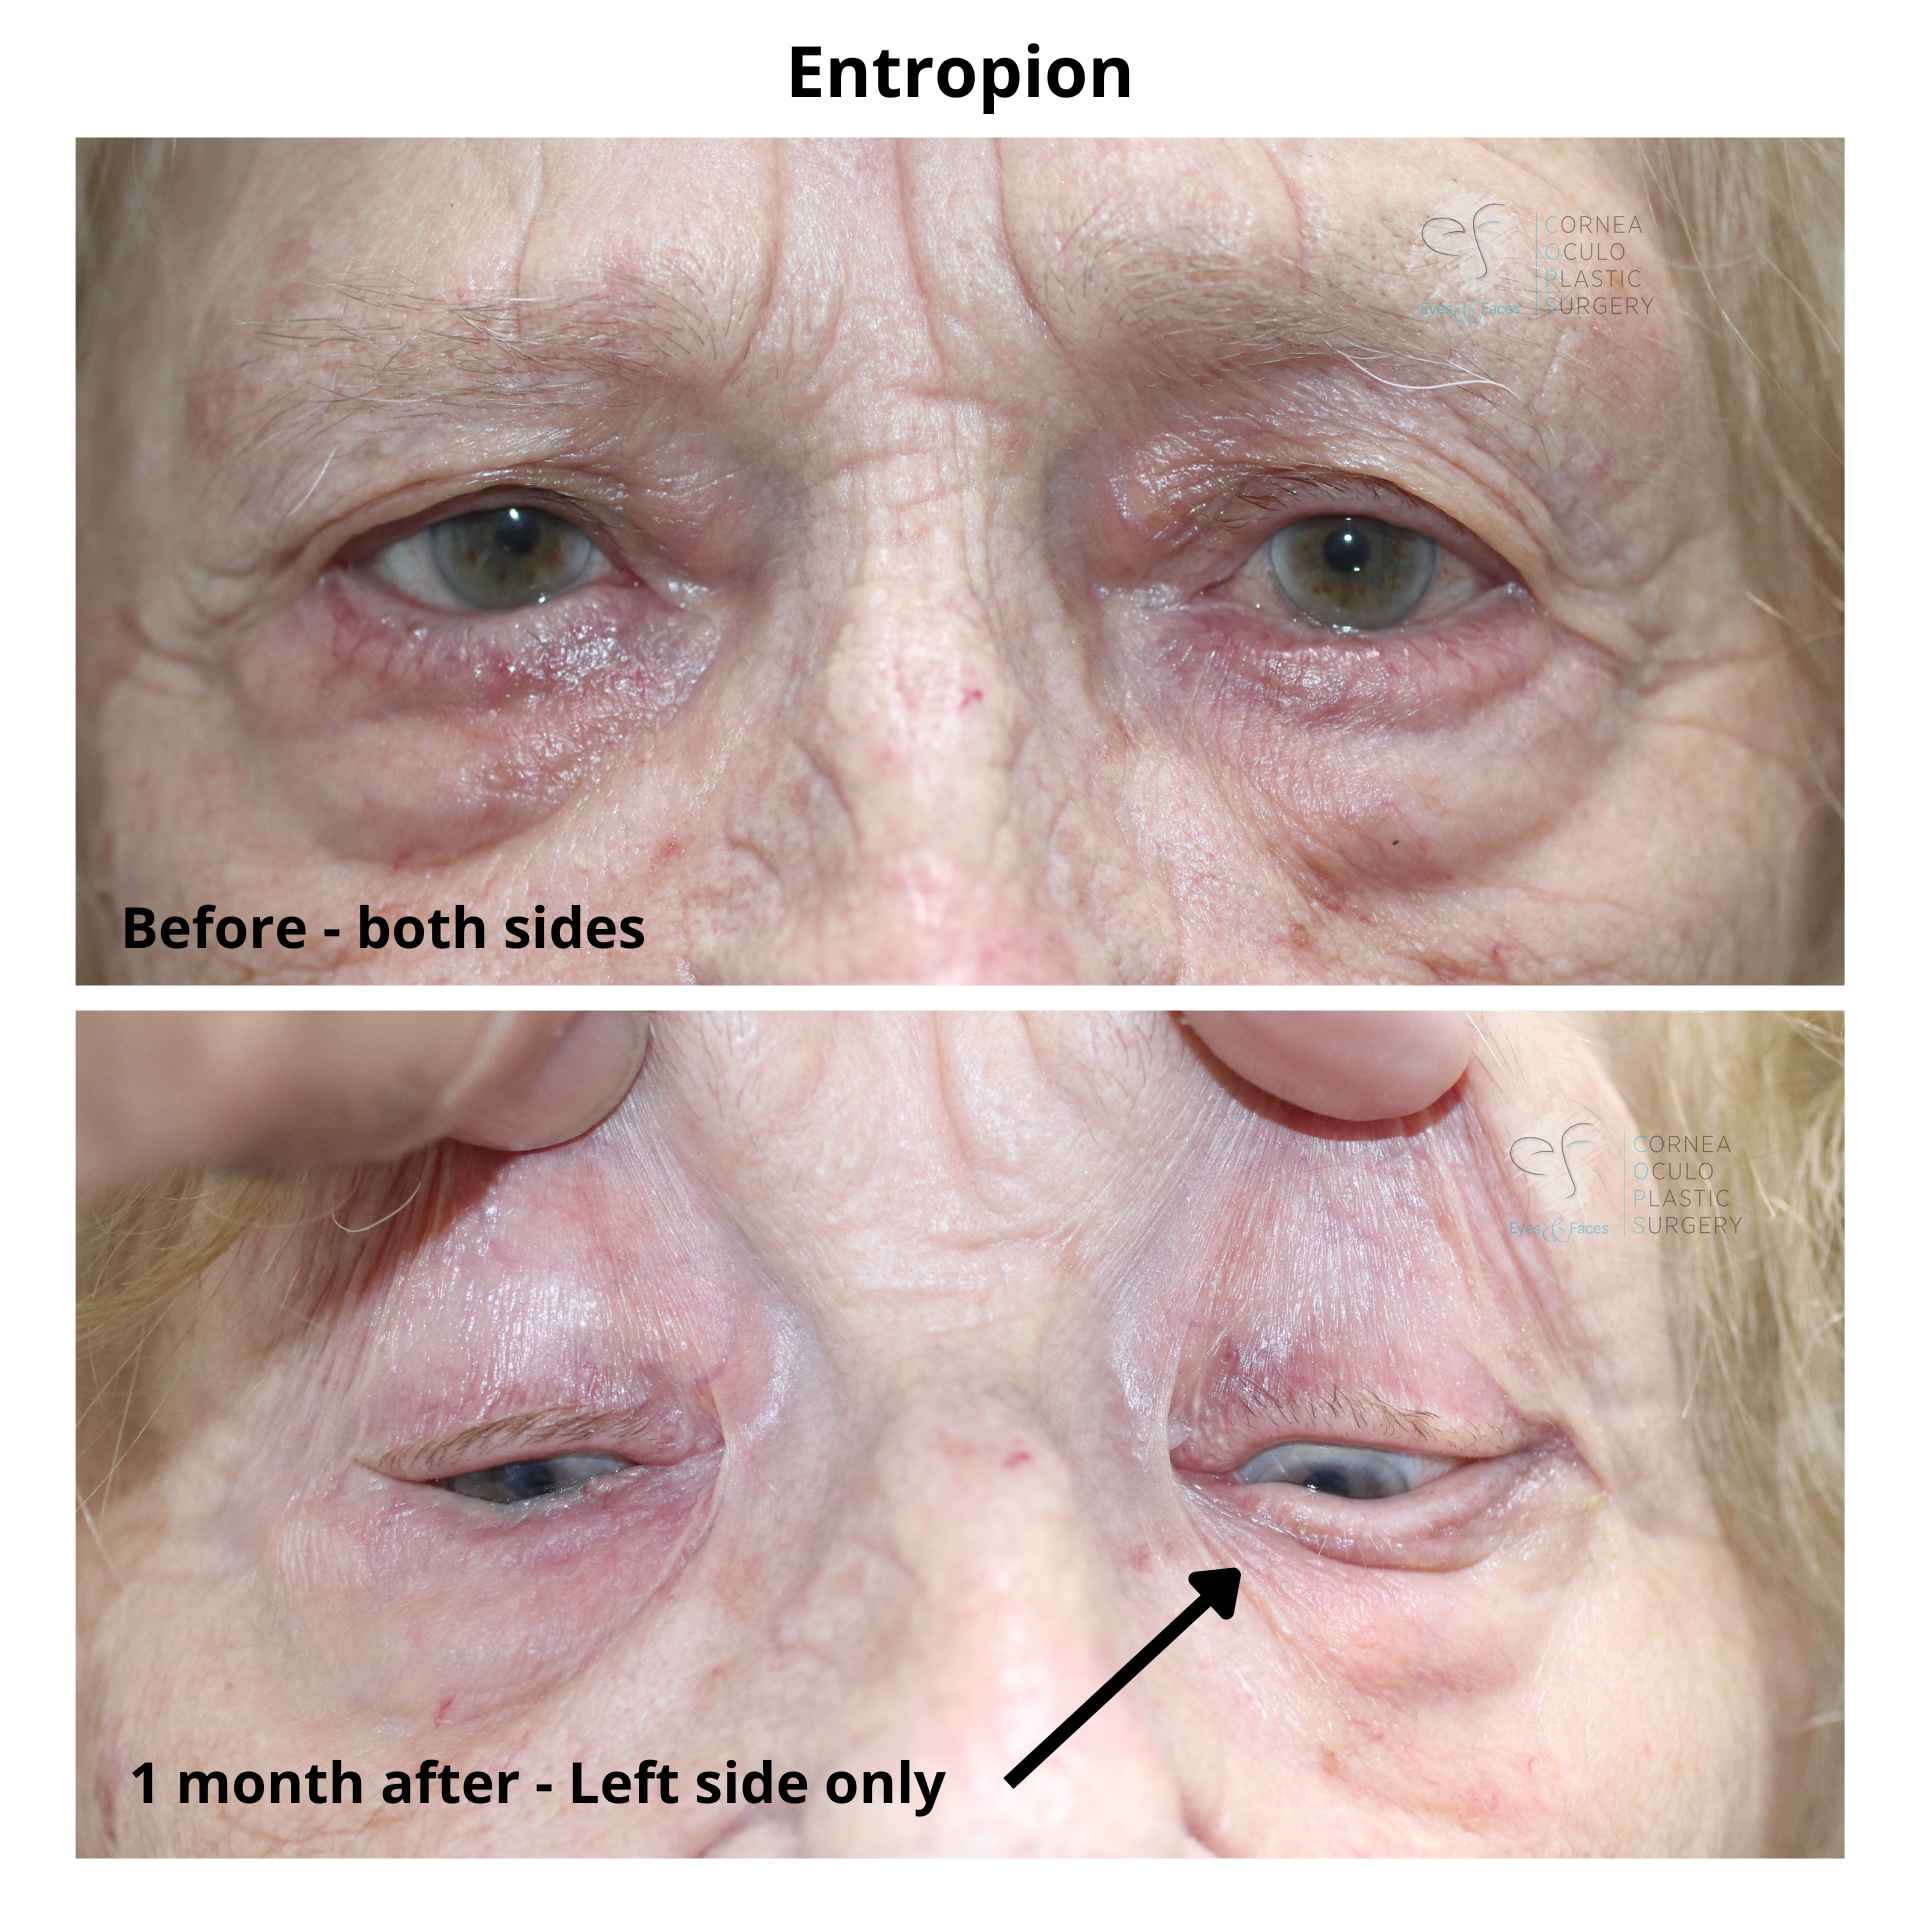 Before and after entropion repair - Dr Anthony Maloof.